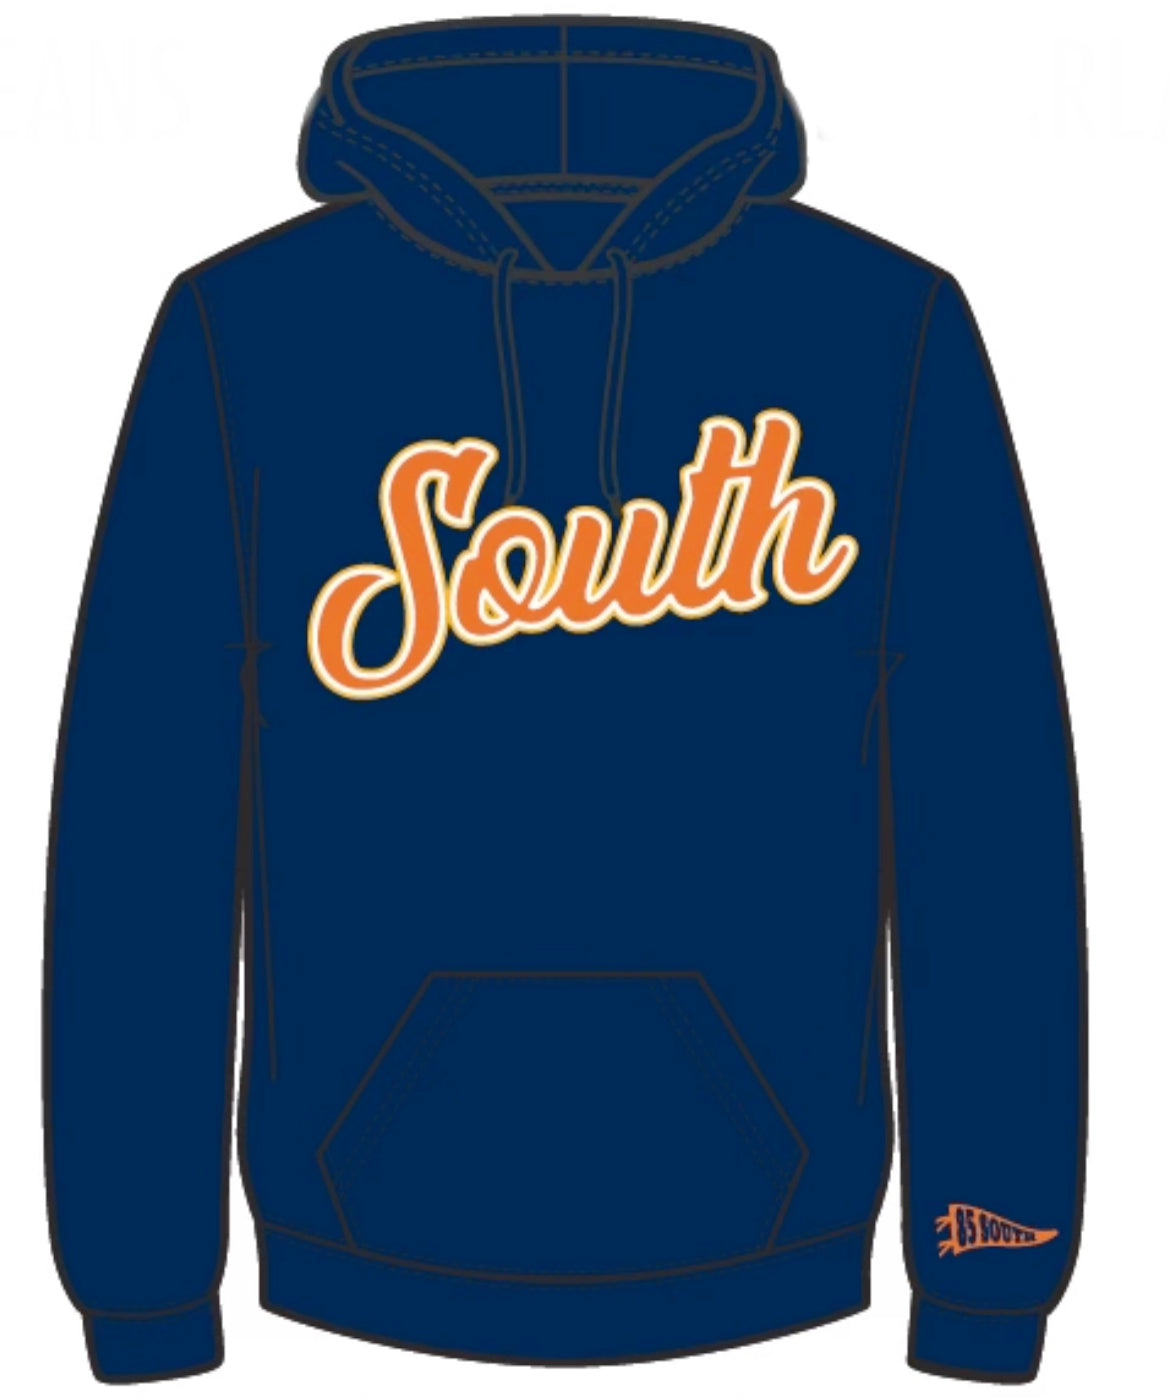 City Edition South Script Hoodie - Sugarland